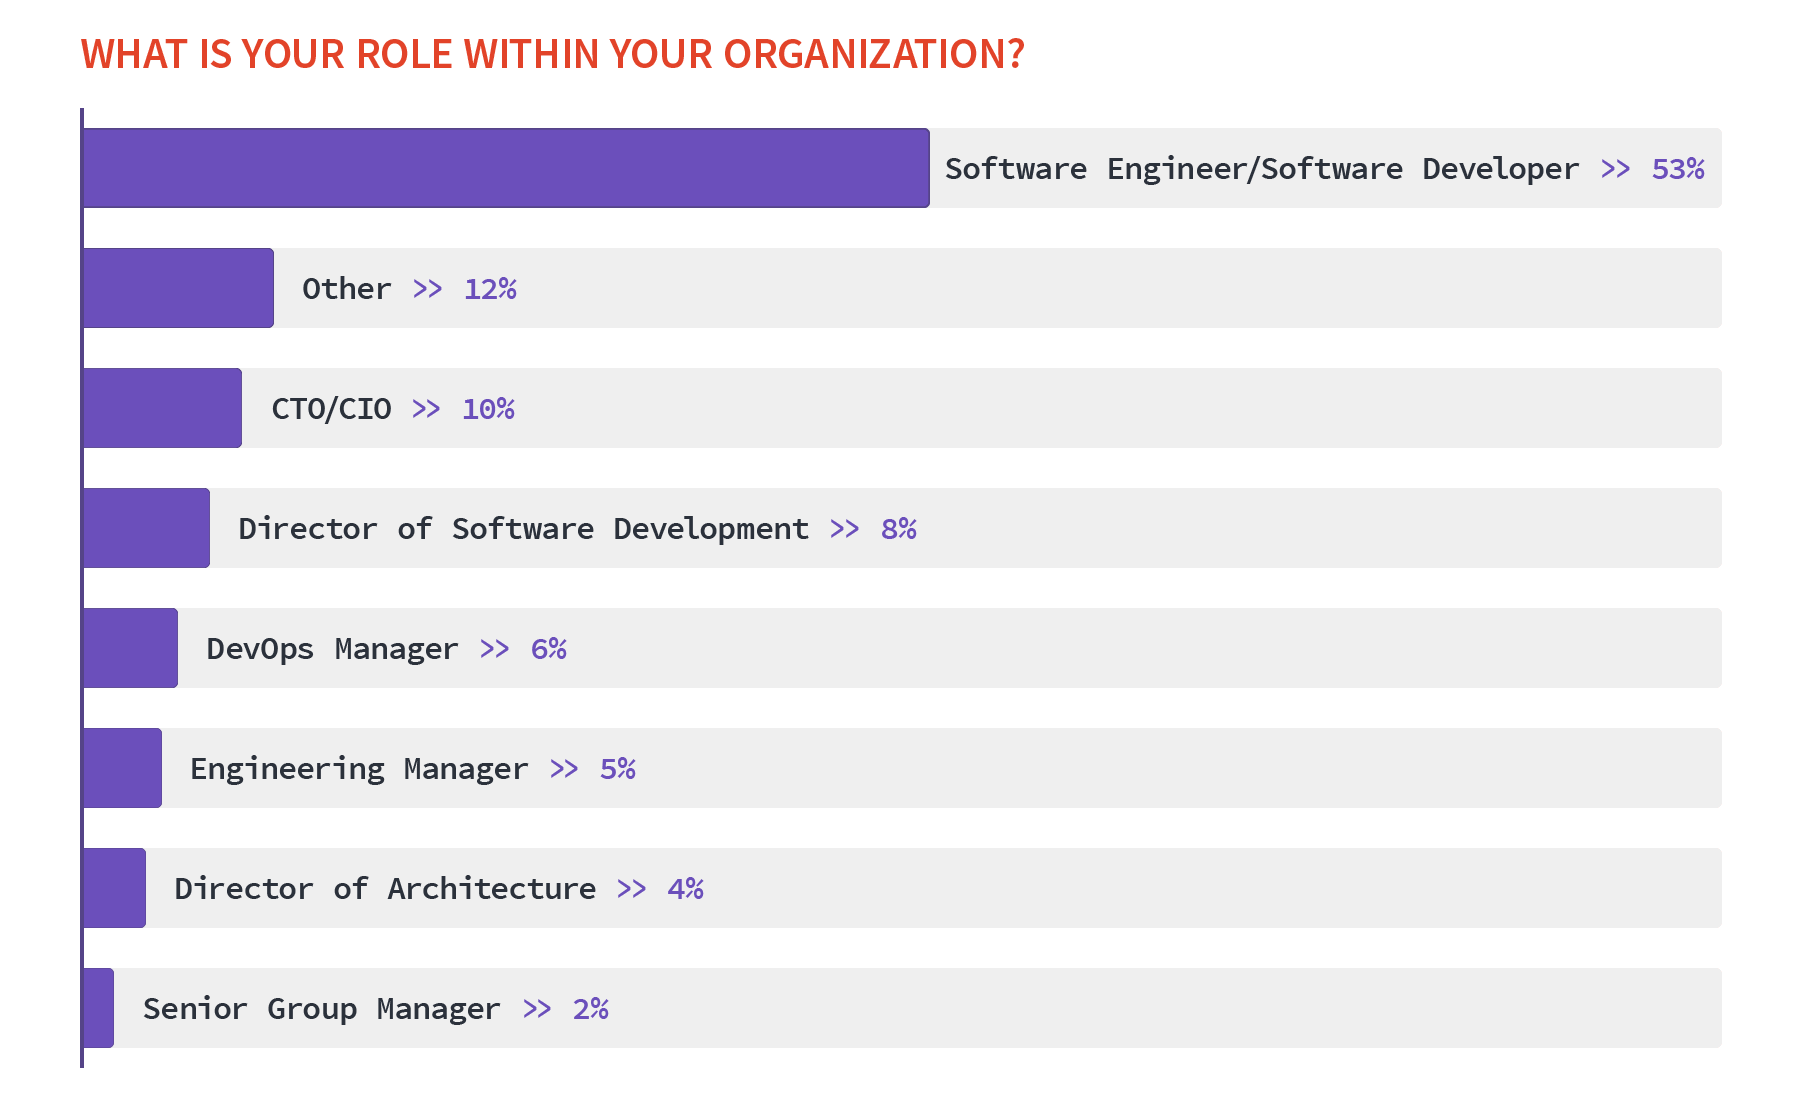 What are respondents' roles